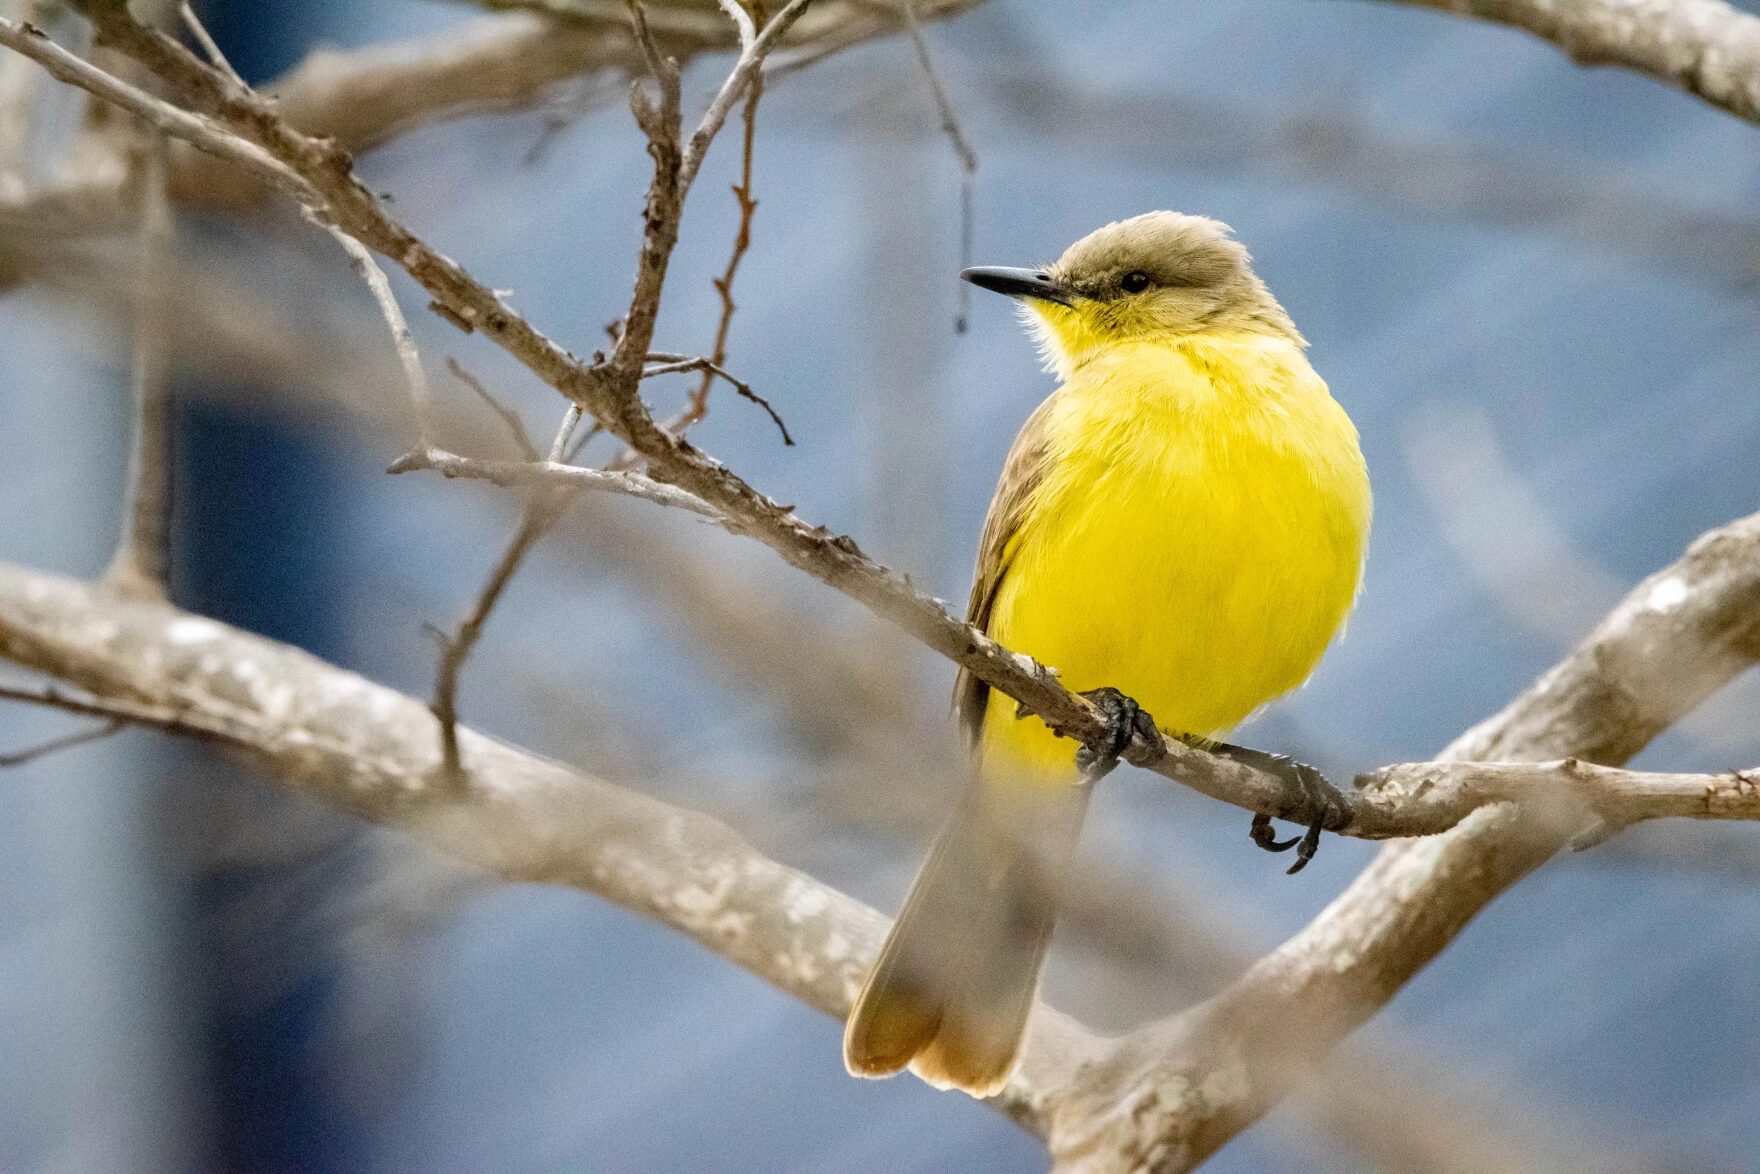 The cattle tyrant is a flycatcher bird native to South America that has never been sighted north of Panama, until now.